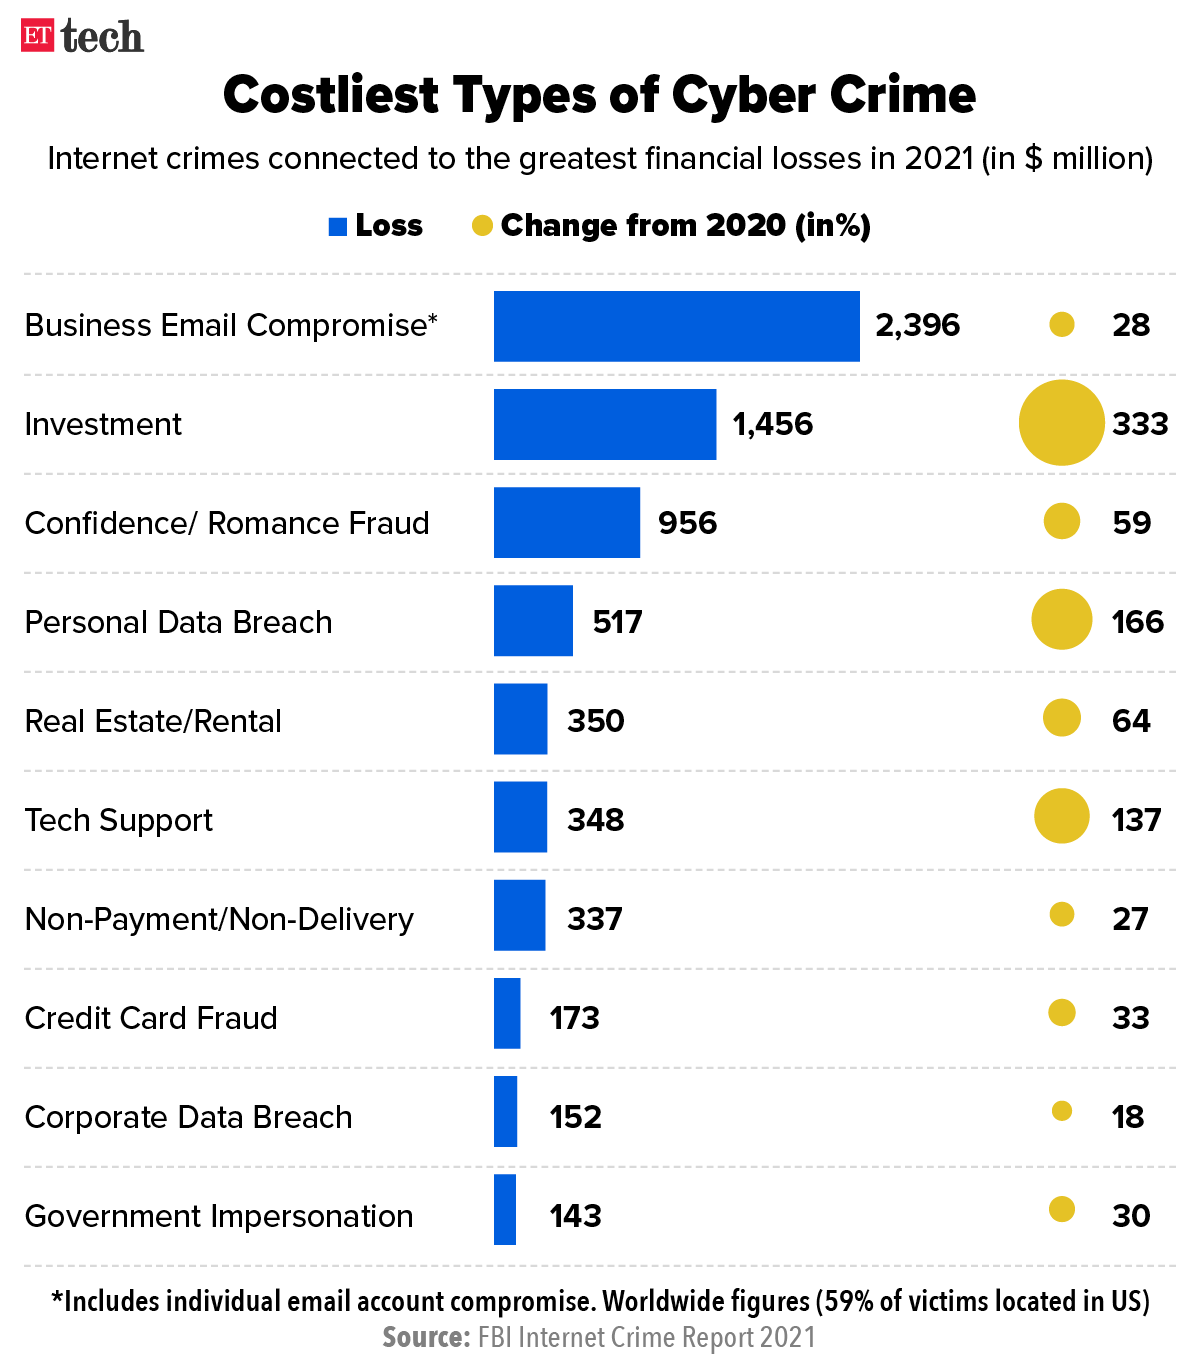 Costliest types of cybercrime